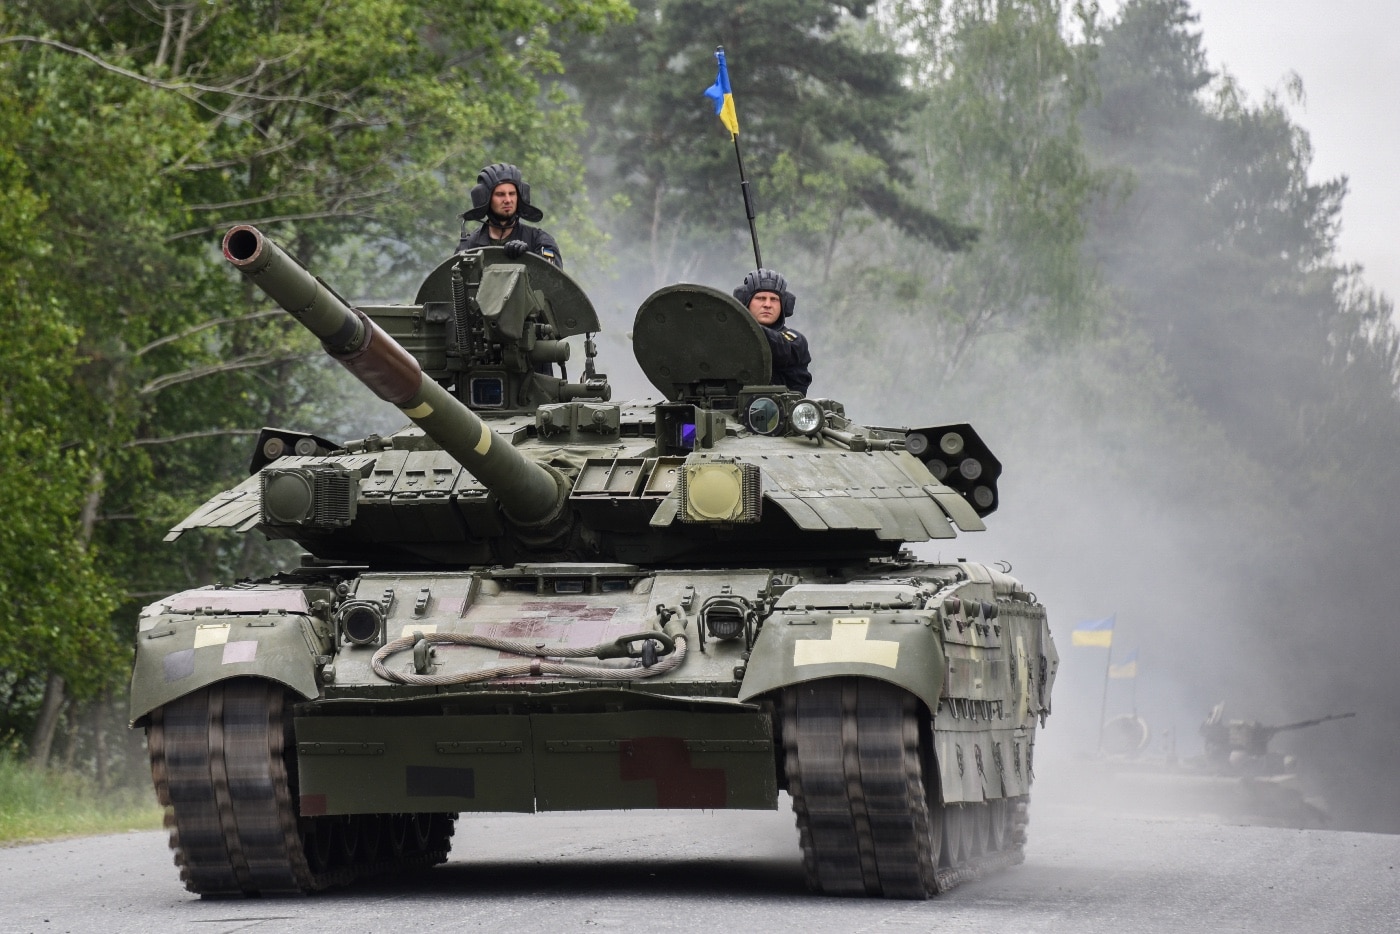 In this digital photograph, a Ukraine T-84 tank drives down road in Germany during a 2018 military competition.